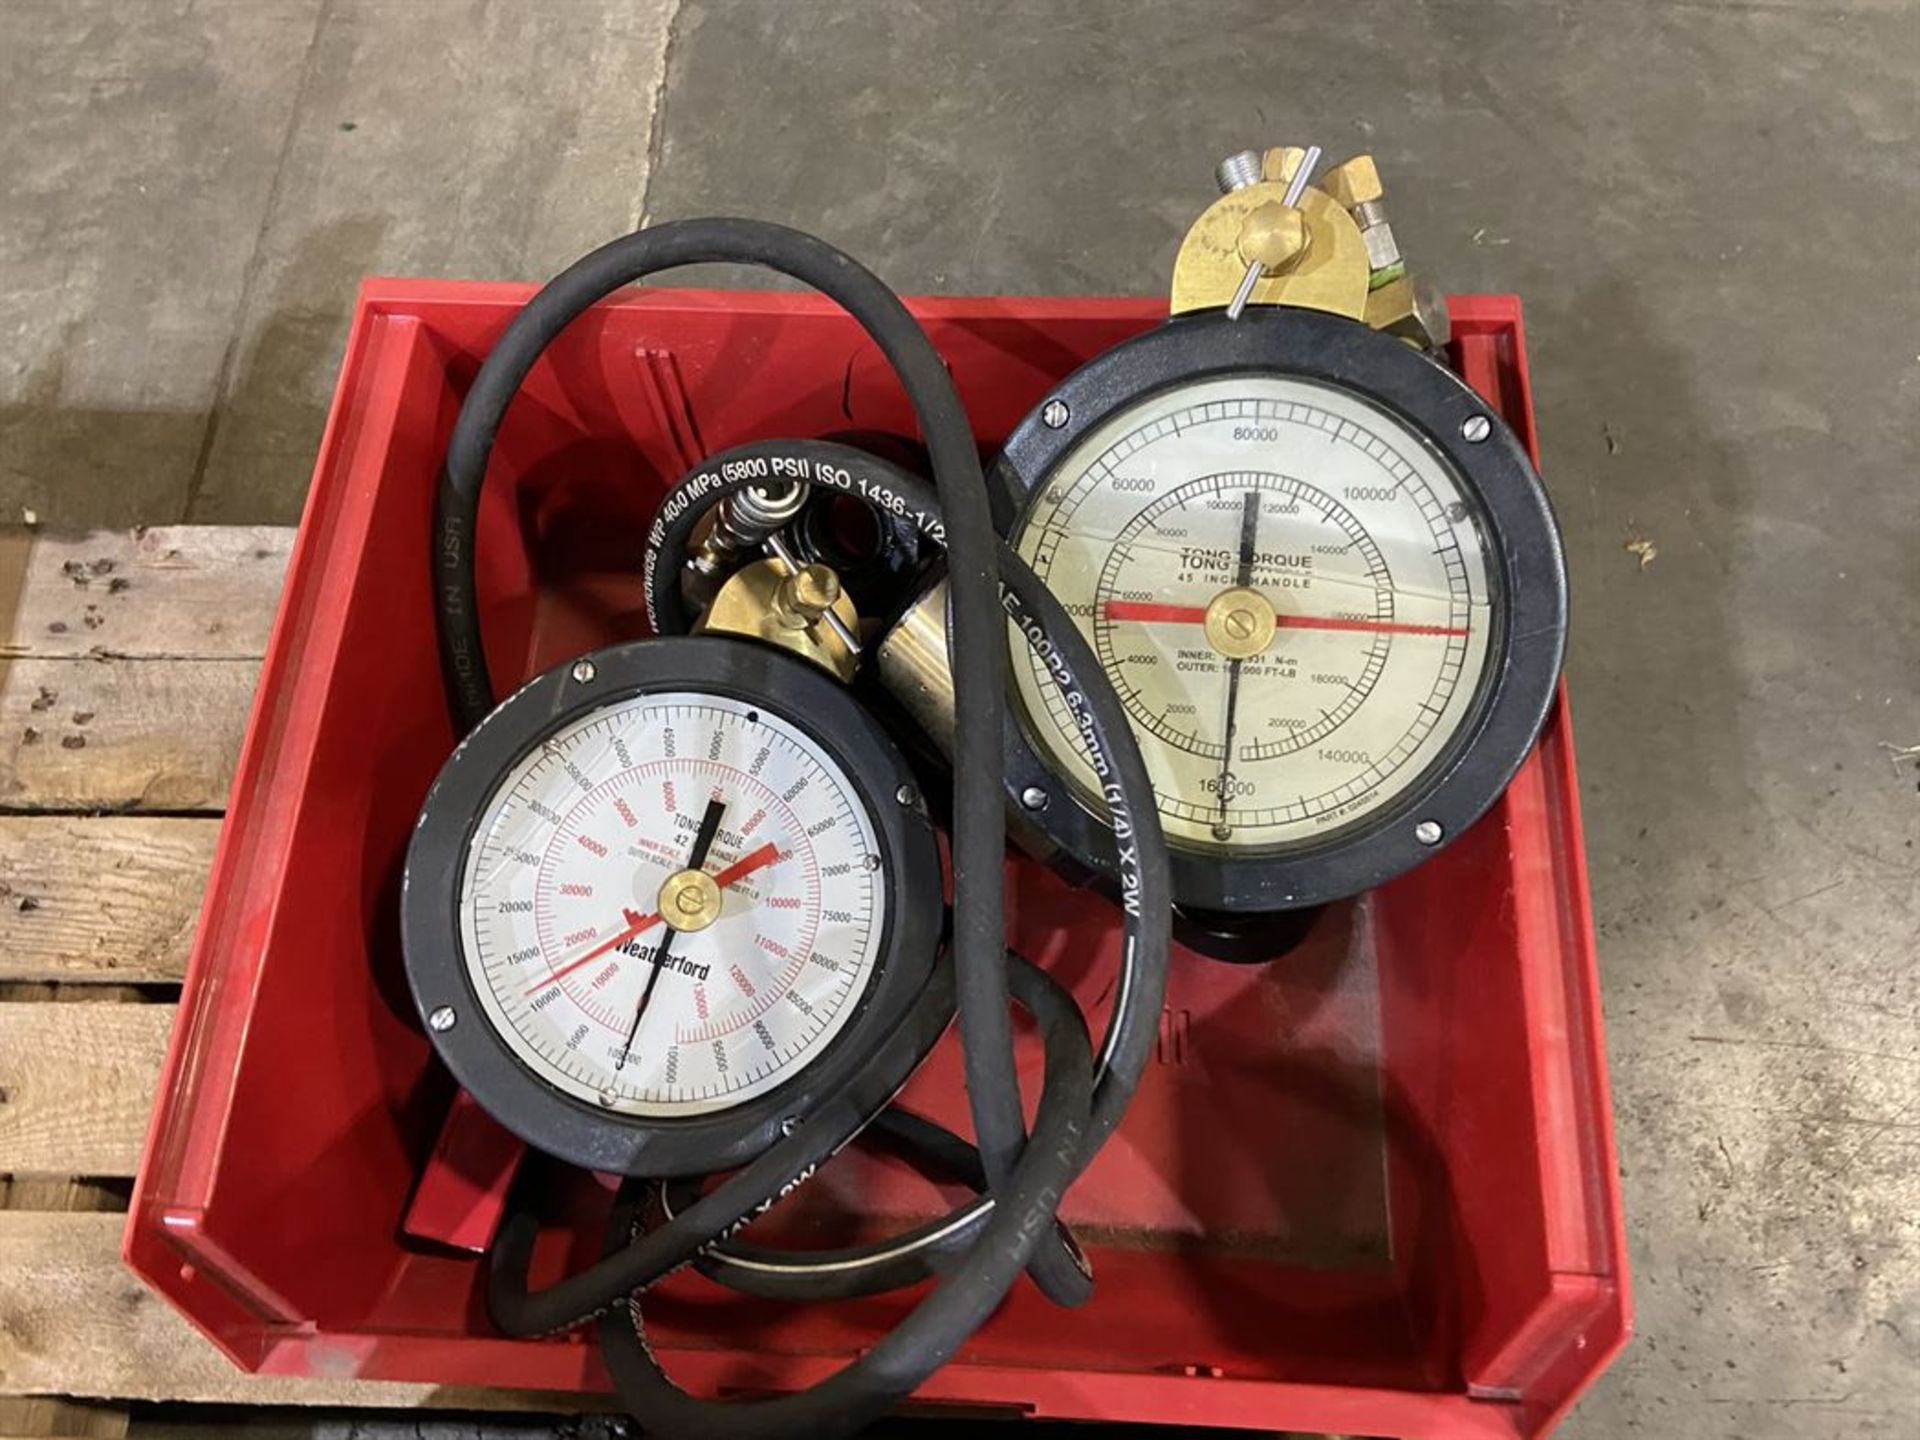 Lot of Hydraulic Gauges (up to 100,000 lbs) - Image 2 of 2